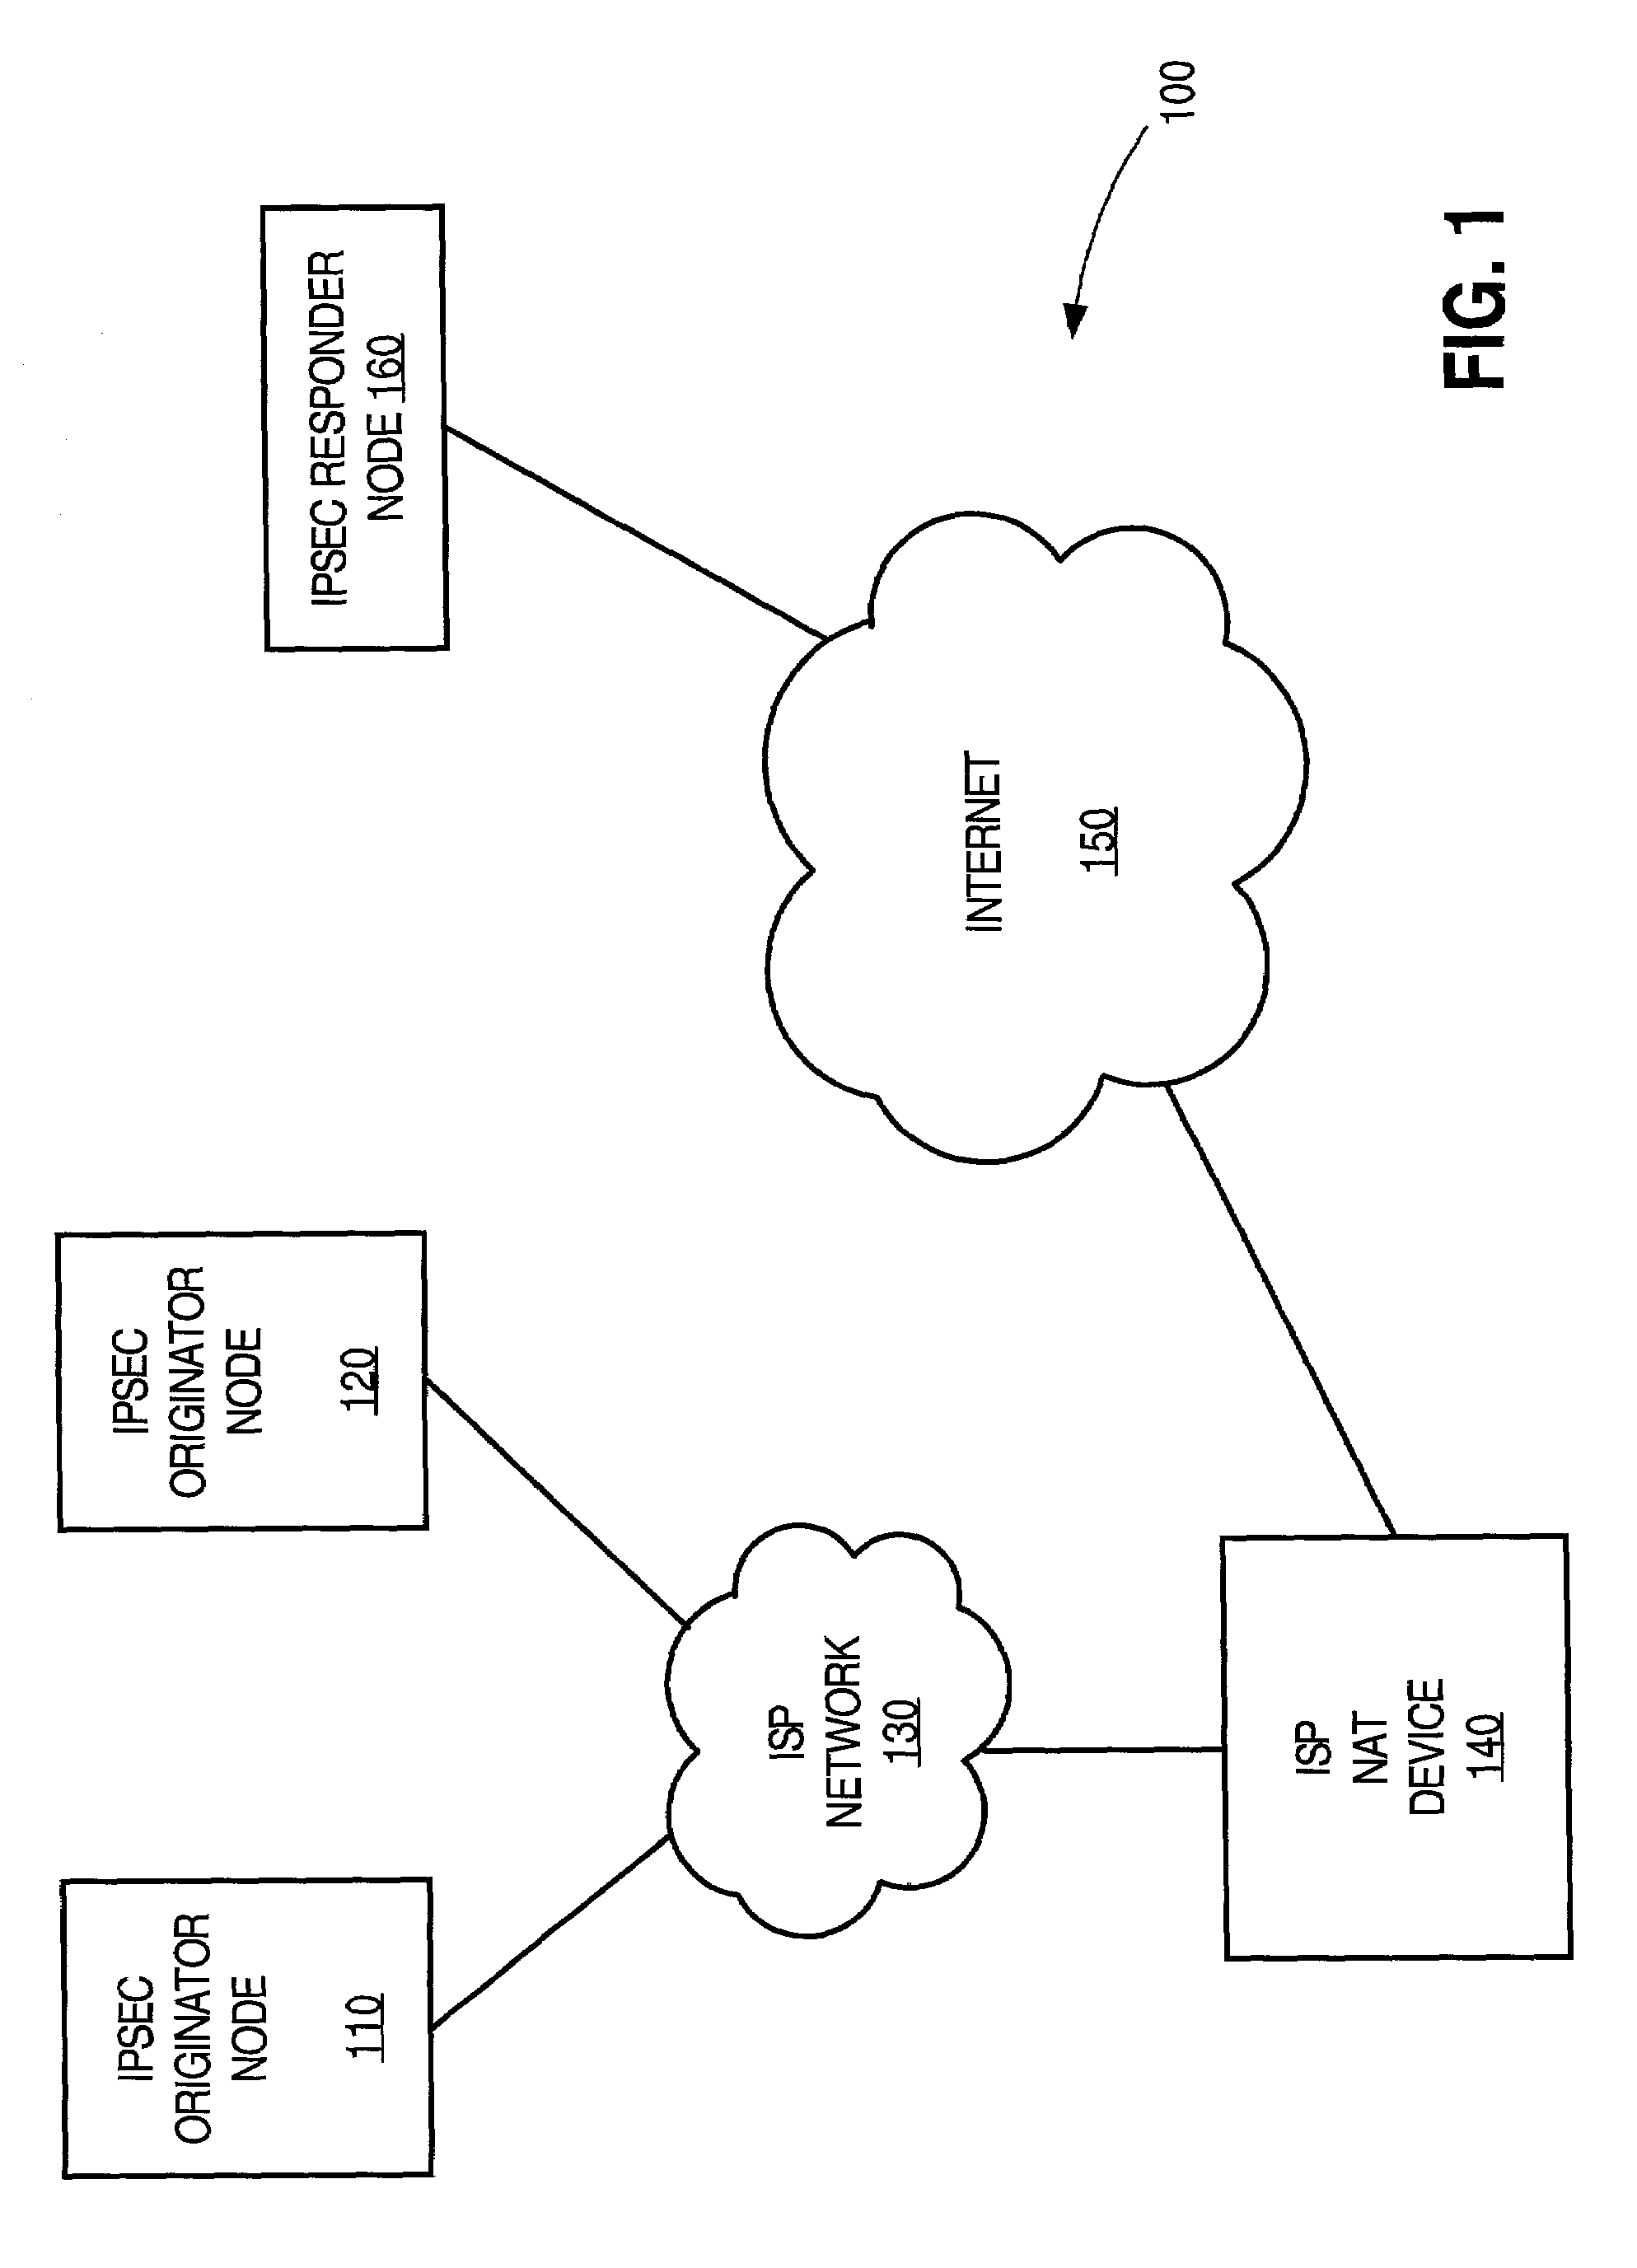 Facilitating IPsec communications through devices that employ address translation in a telecommunications network